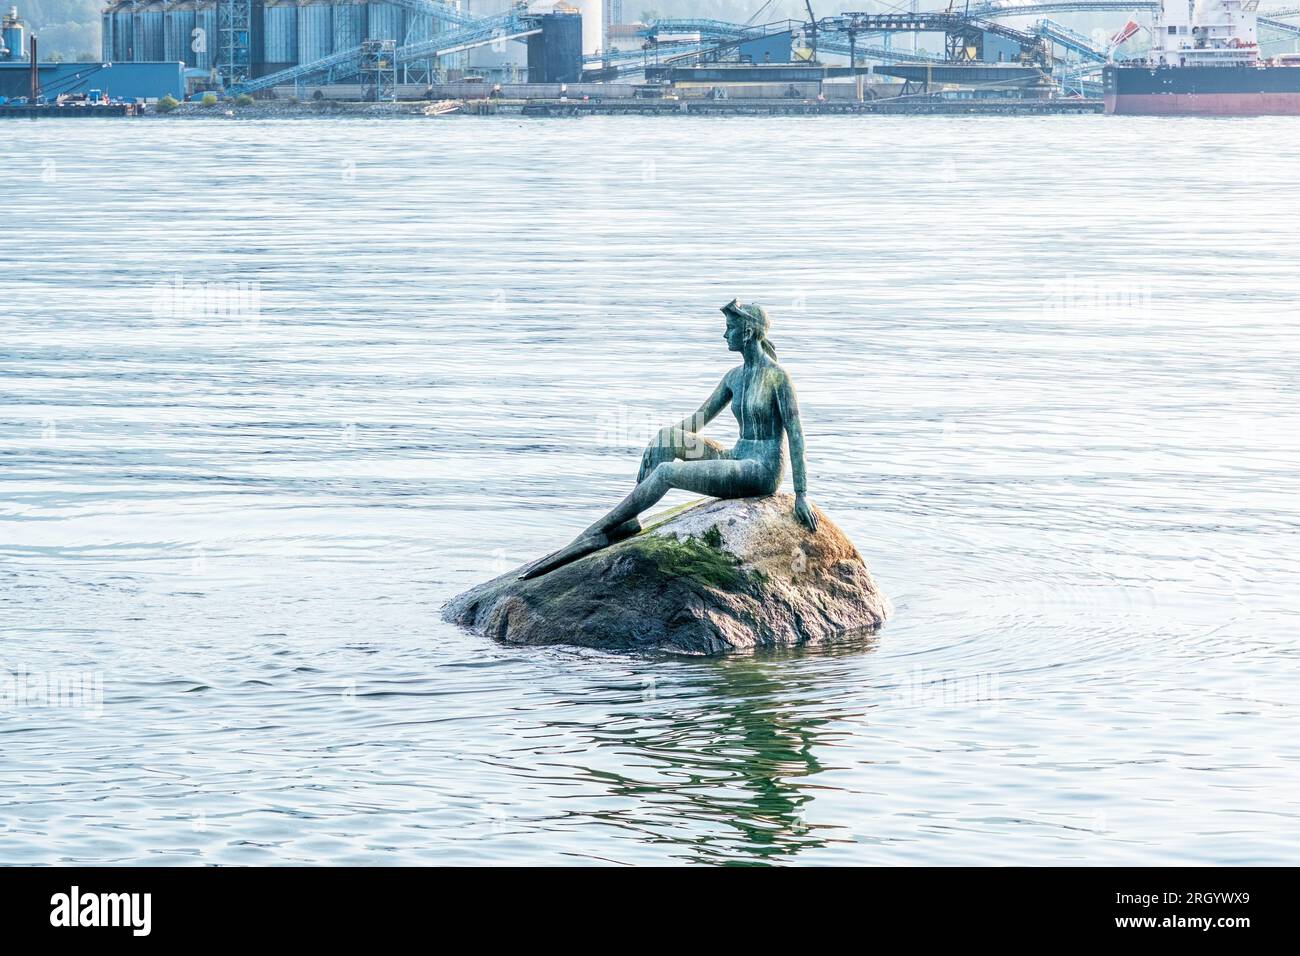 Donated to the City of Vancouver in 1972 by the Vancouver Harbour Improvement Society, Girl in Wetsuit by Elek Imredy has become one of many iconic st Stock Photo